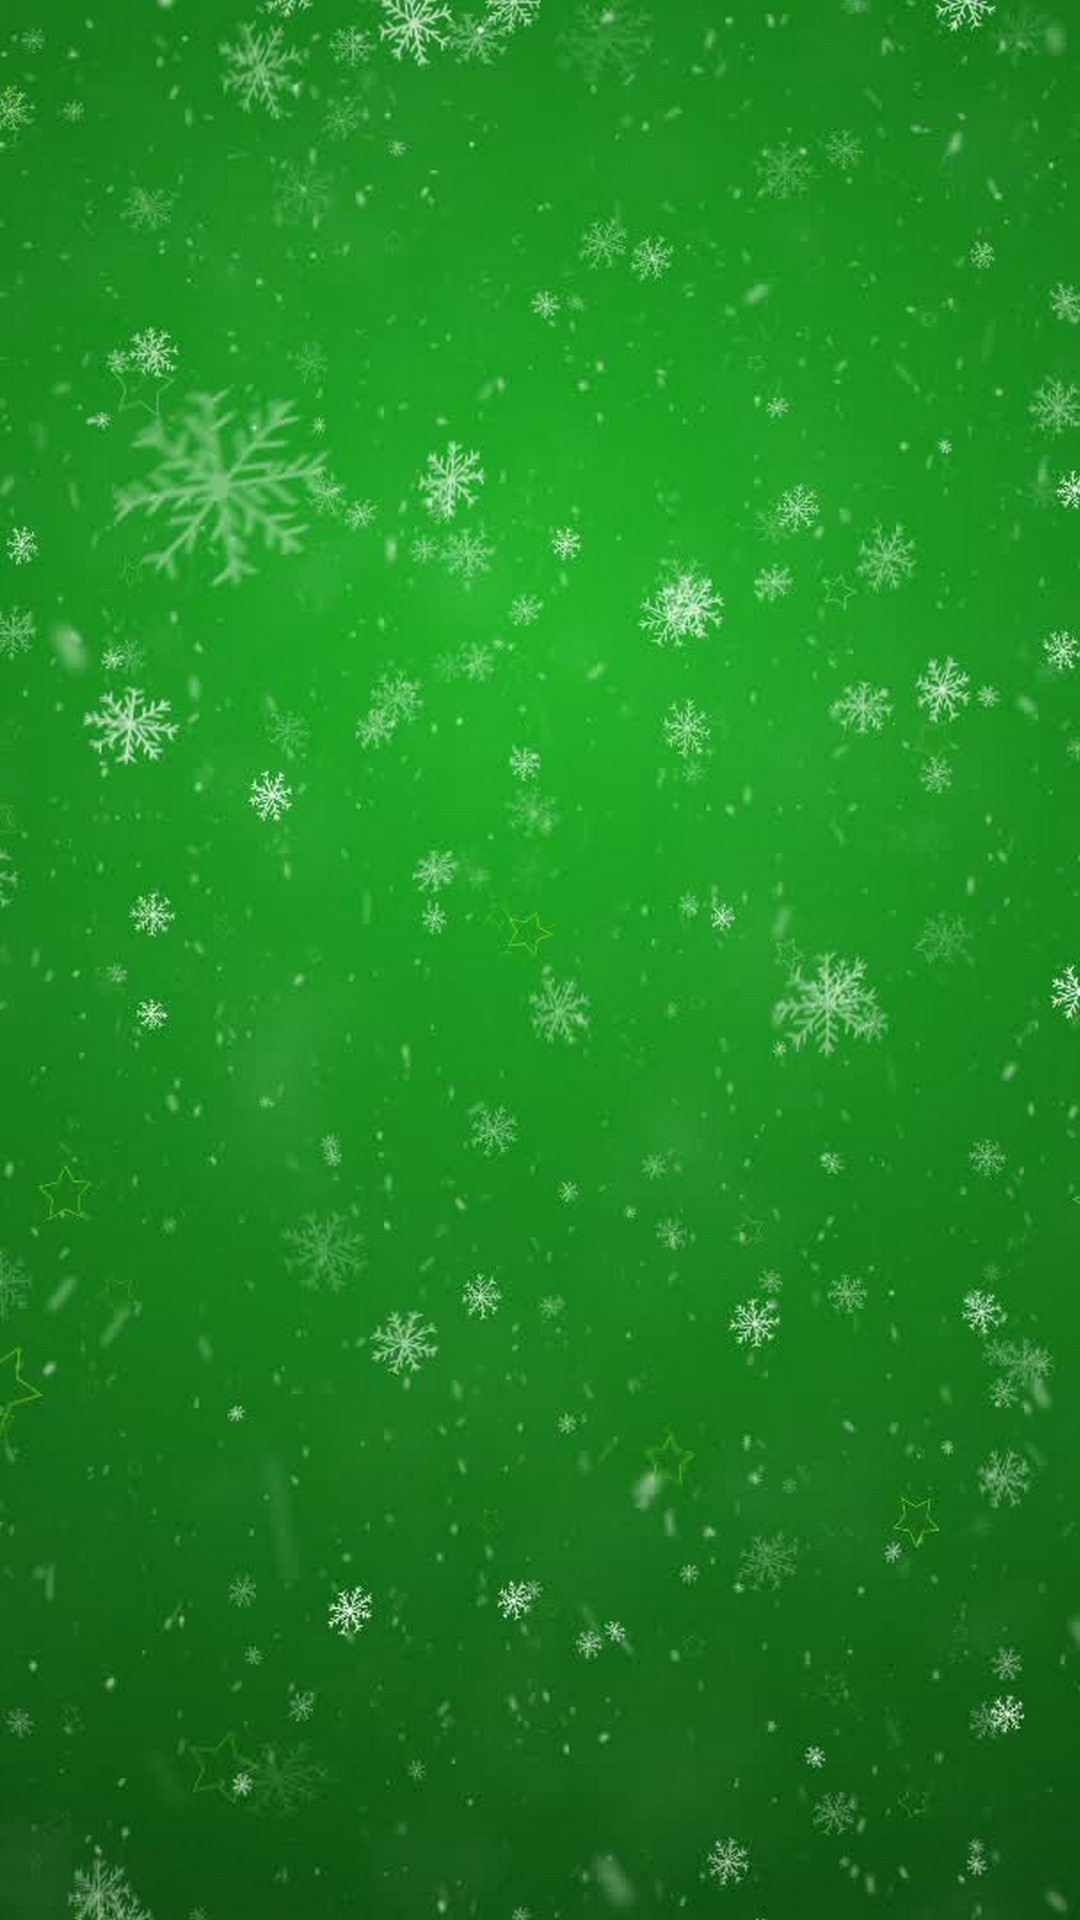 iPhone X Wallpaper Dark Green with resolution 1080X1920 pixel. You can make this wallpaper for your iPhone 5, 6, 7, 8, X backgrounds, Mobile Screensaver, or iPad Lock Screen